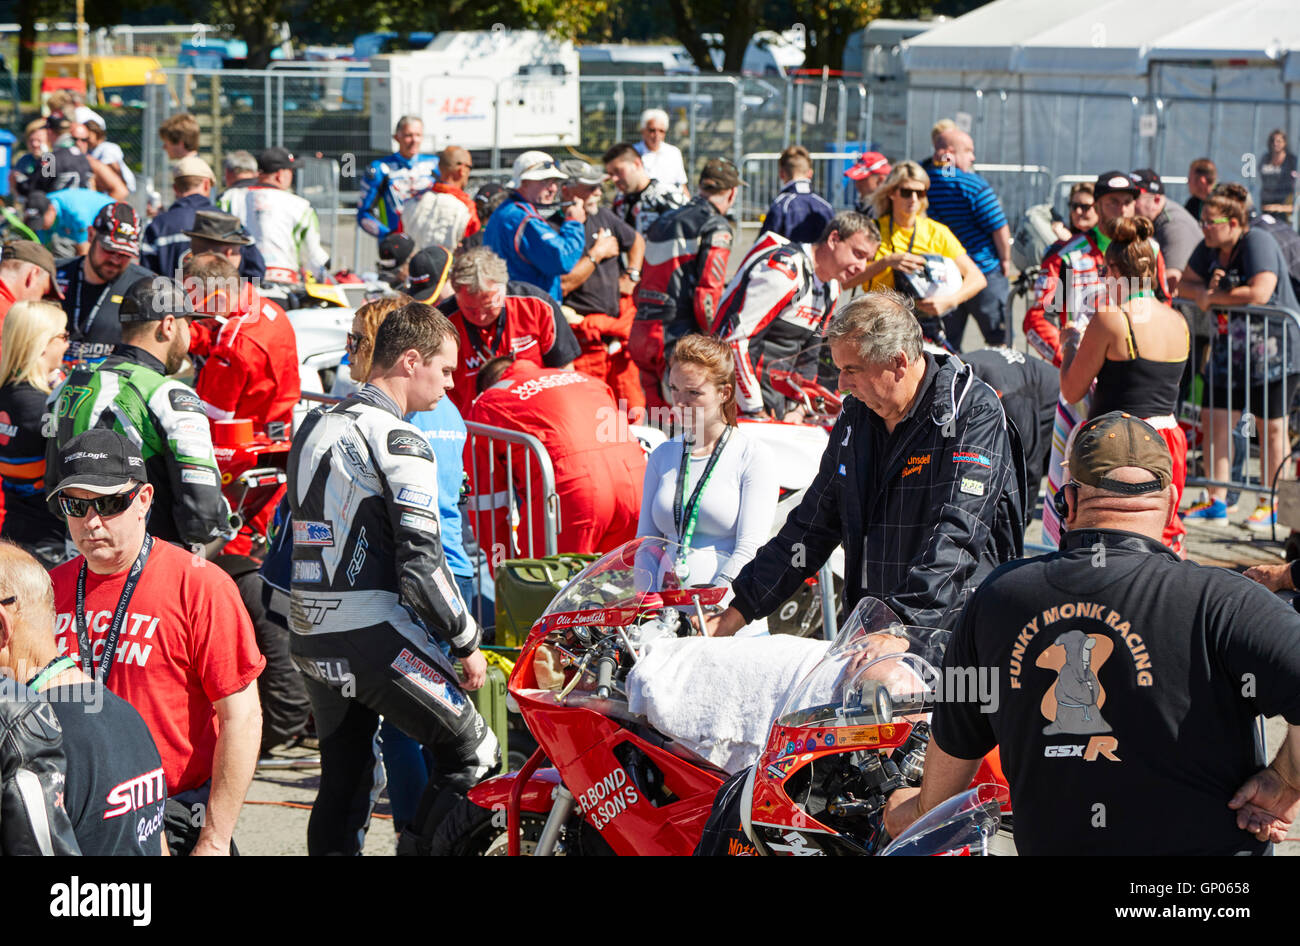 Competitors at the paddock area before the Superbike Classic TT race, Festival of Motorcycling 2016 Stock Photo